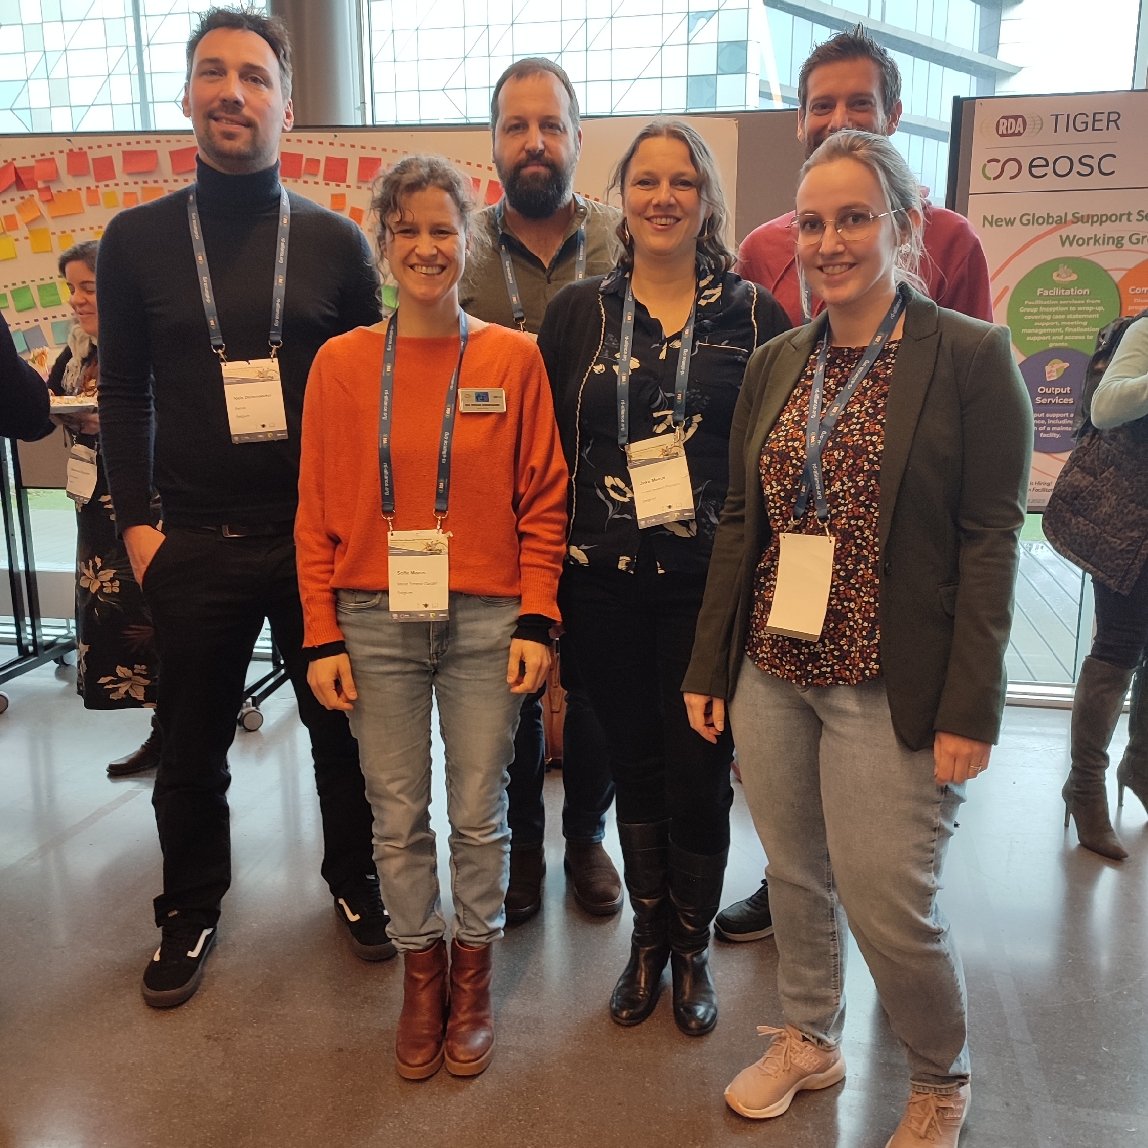 Inspired by the #ResearchDataAlliance and the lovely people present at the #RDAplenary we bring many ideas back home 🇧🇪 #BelgiansInGothenburg @BGM_coll_res @FWOVlaanderen @ugent @KULeuvenOpenSc @belnet_be